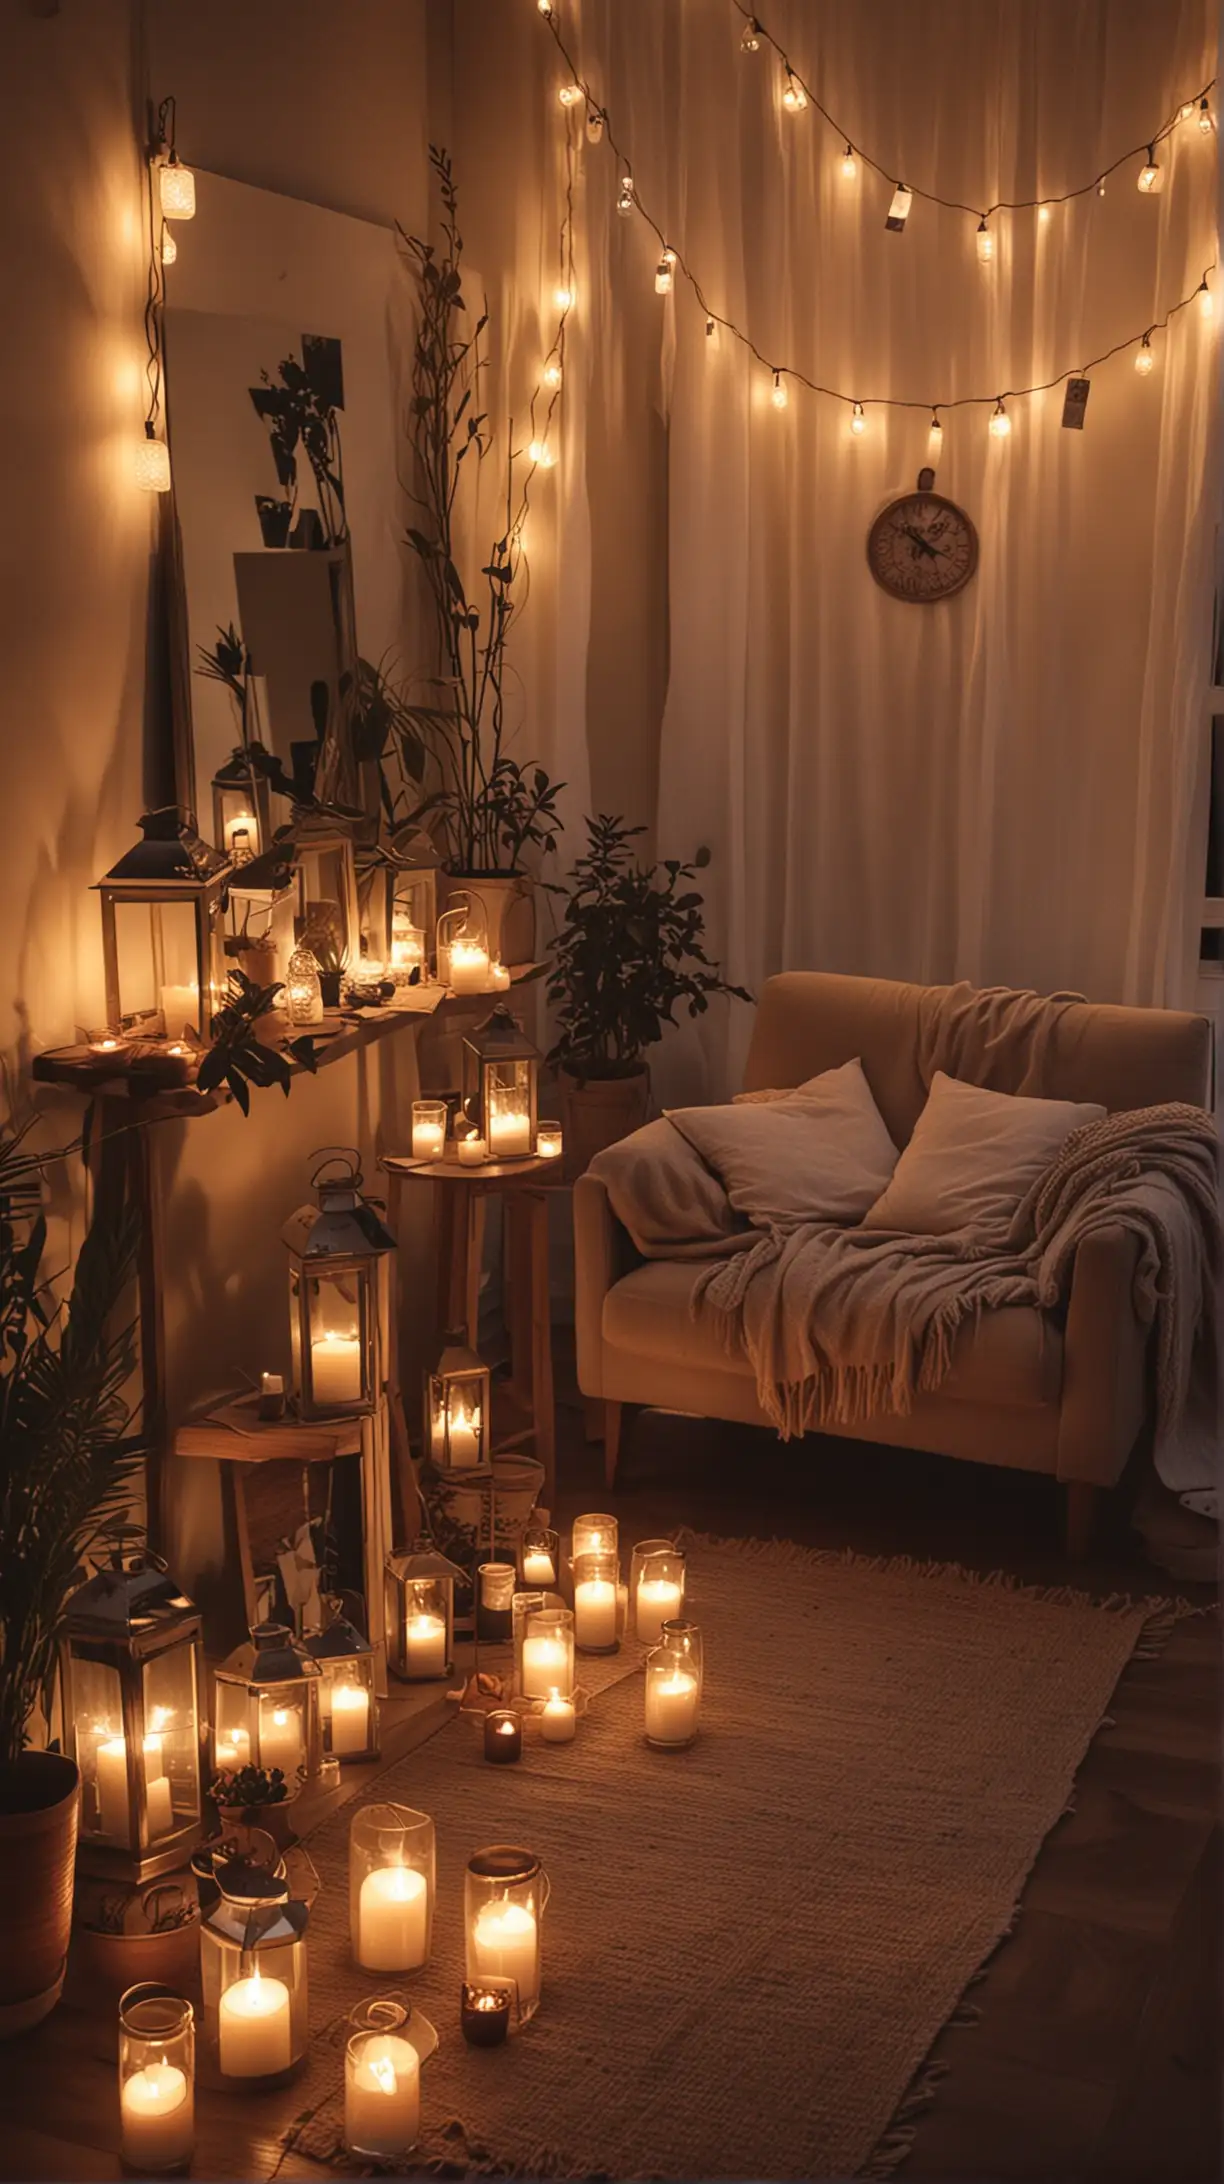 Cozy Living Room with Candlelit Ambiance at Dusk